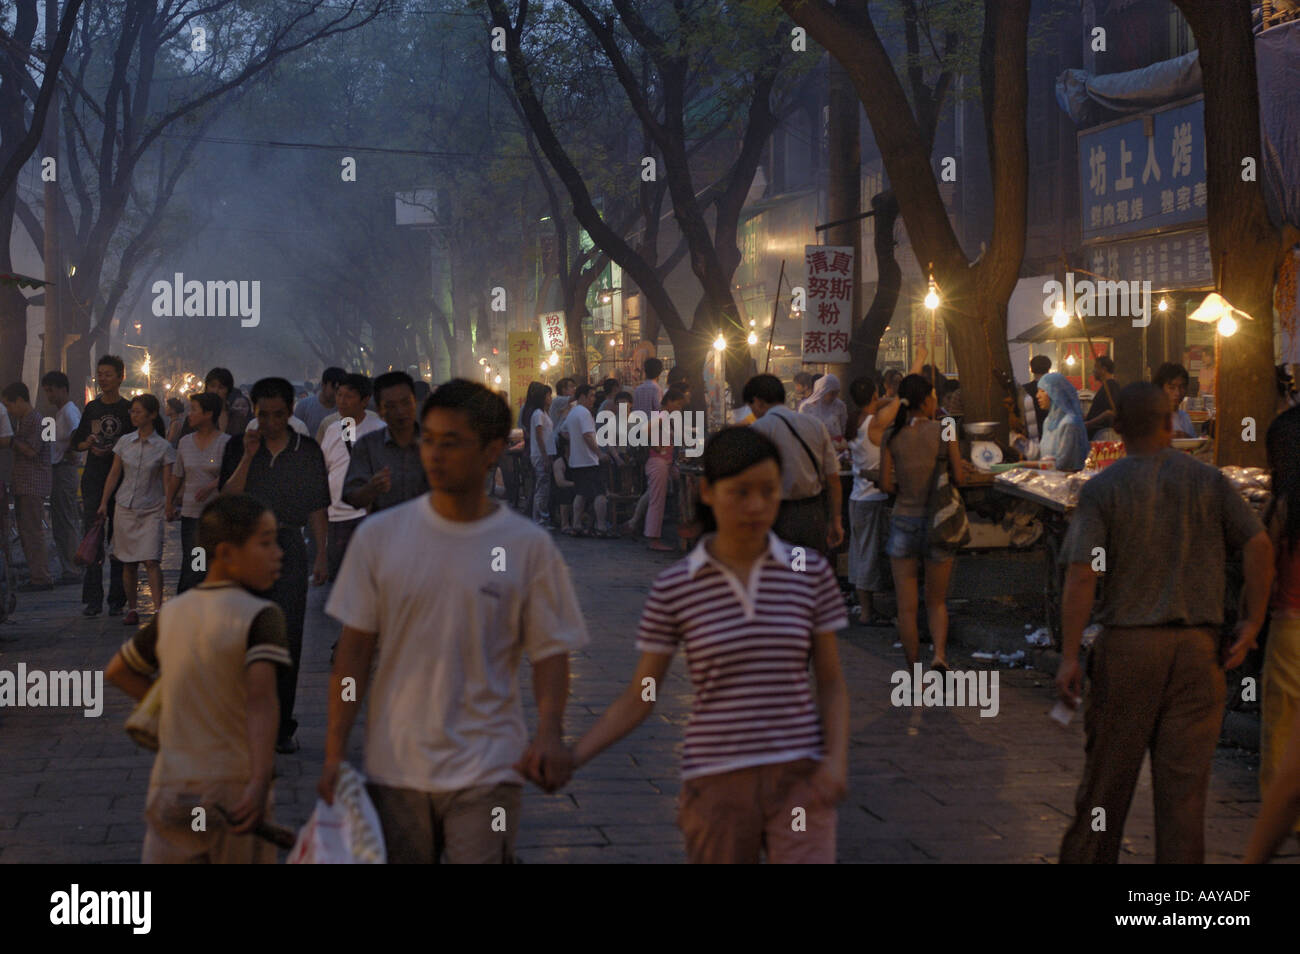 Xian, Shaanxi, China - The Muslim District Of Daqingzhen Si - People out in a busy street at night Stock Photo